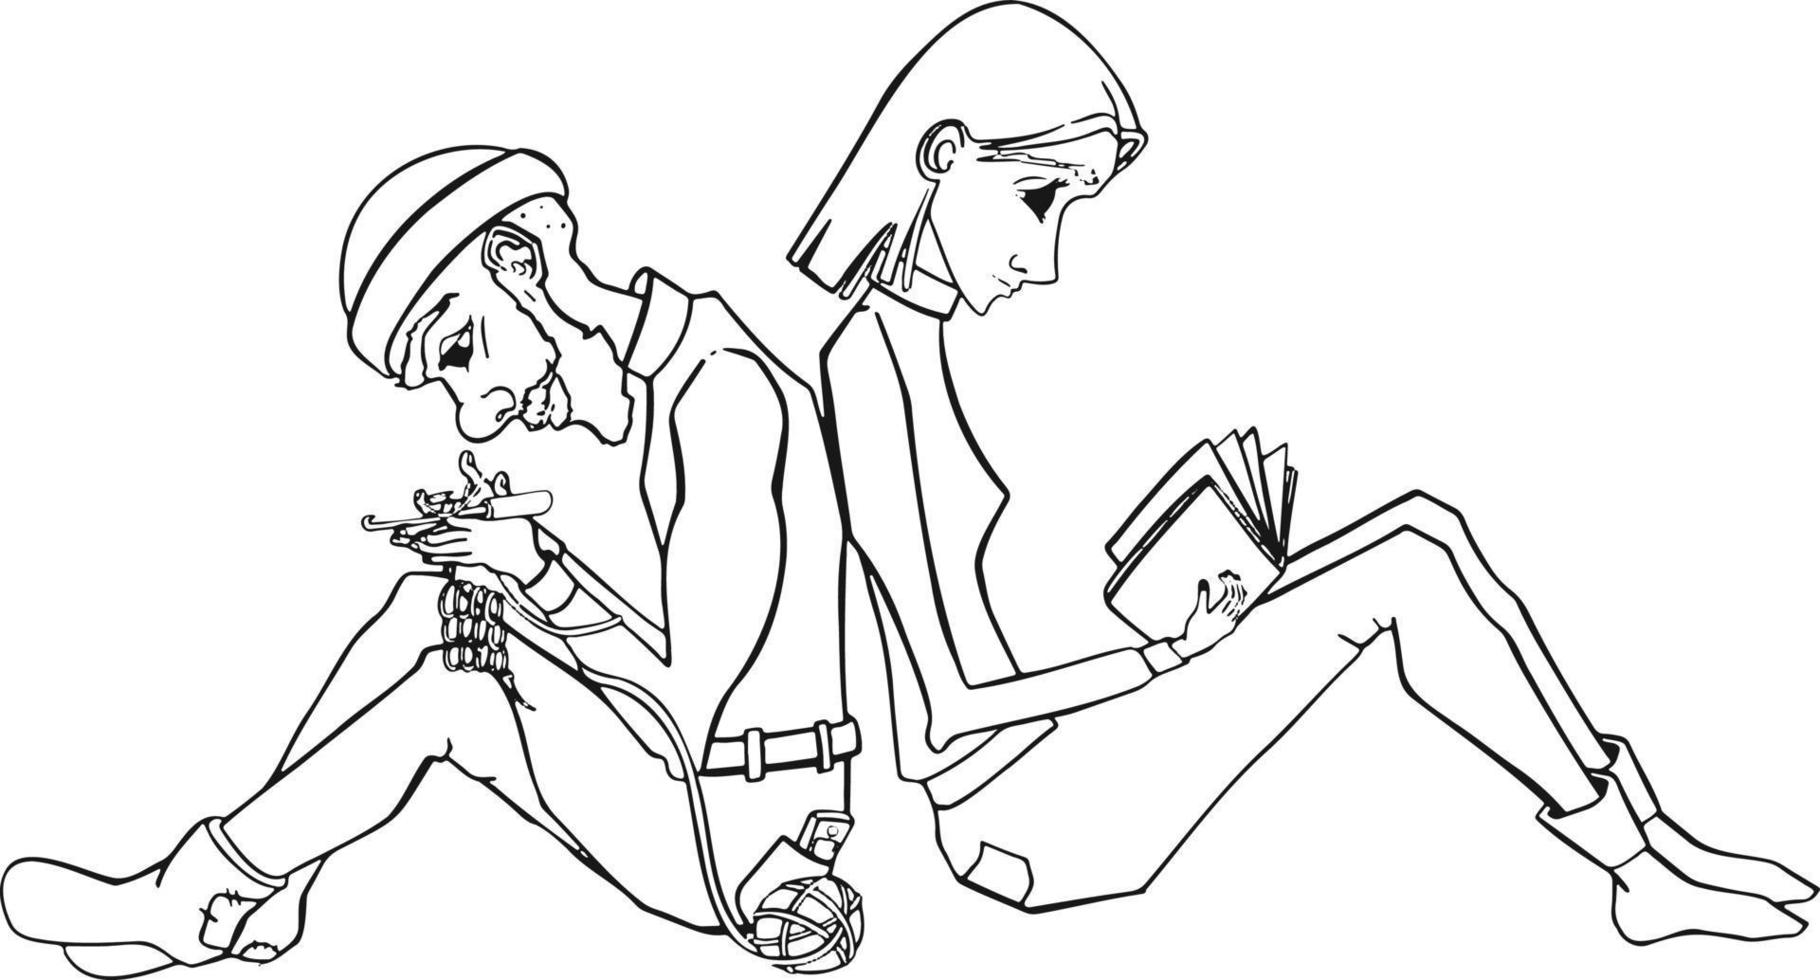 Lady reading and gentleman knitting on the carpet vector